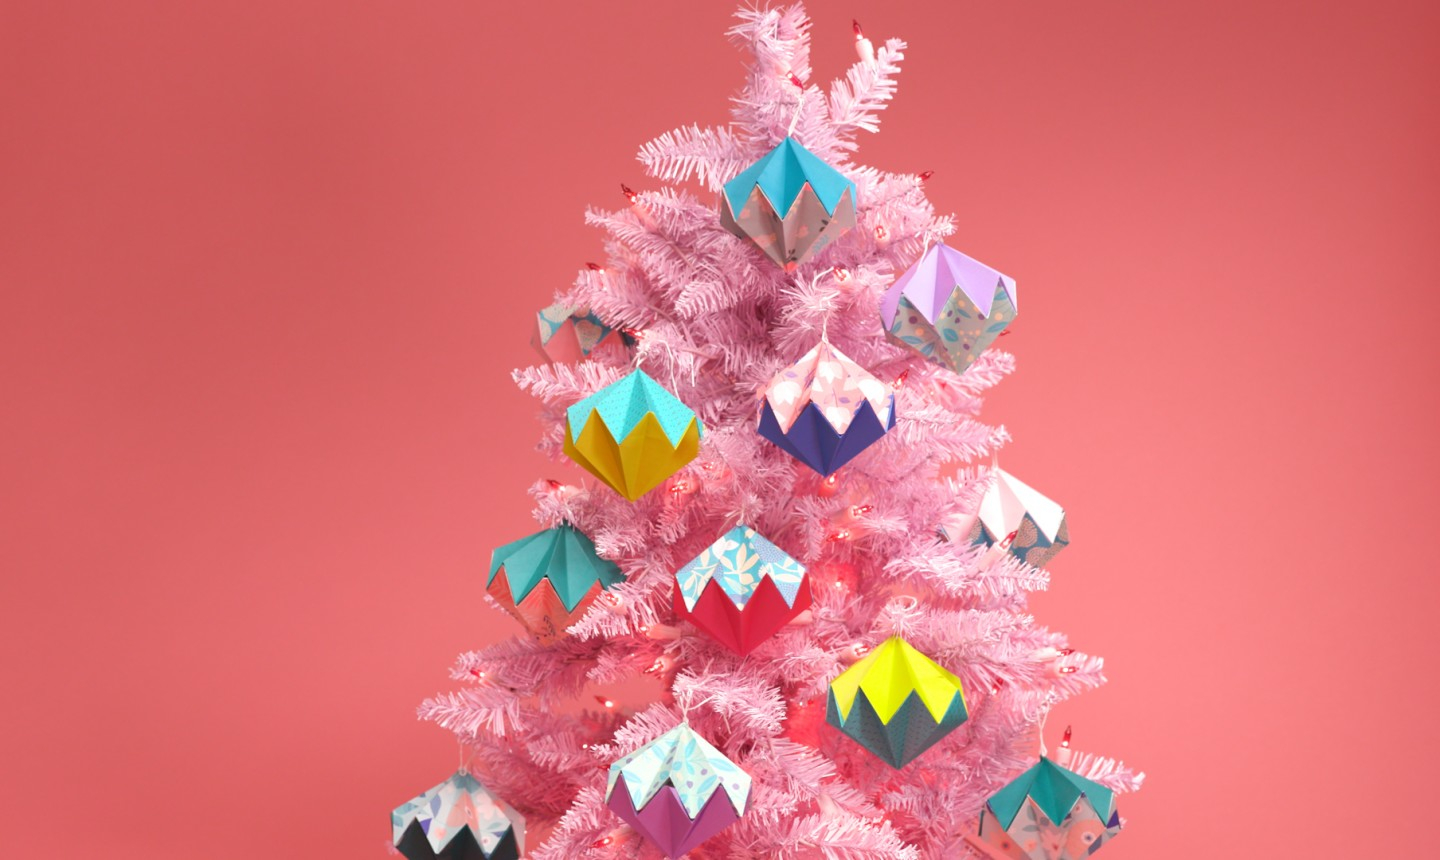 How To Design Origami These Diy Origami Ornaments Are Just So Cool